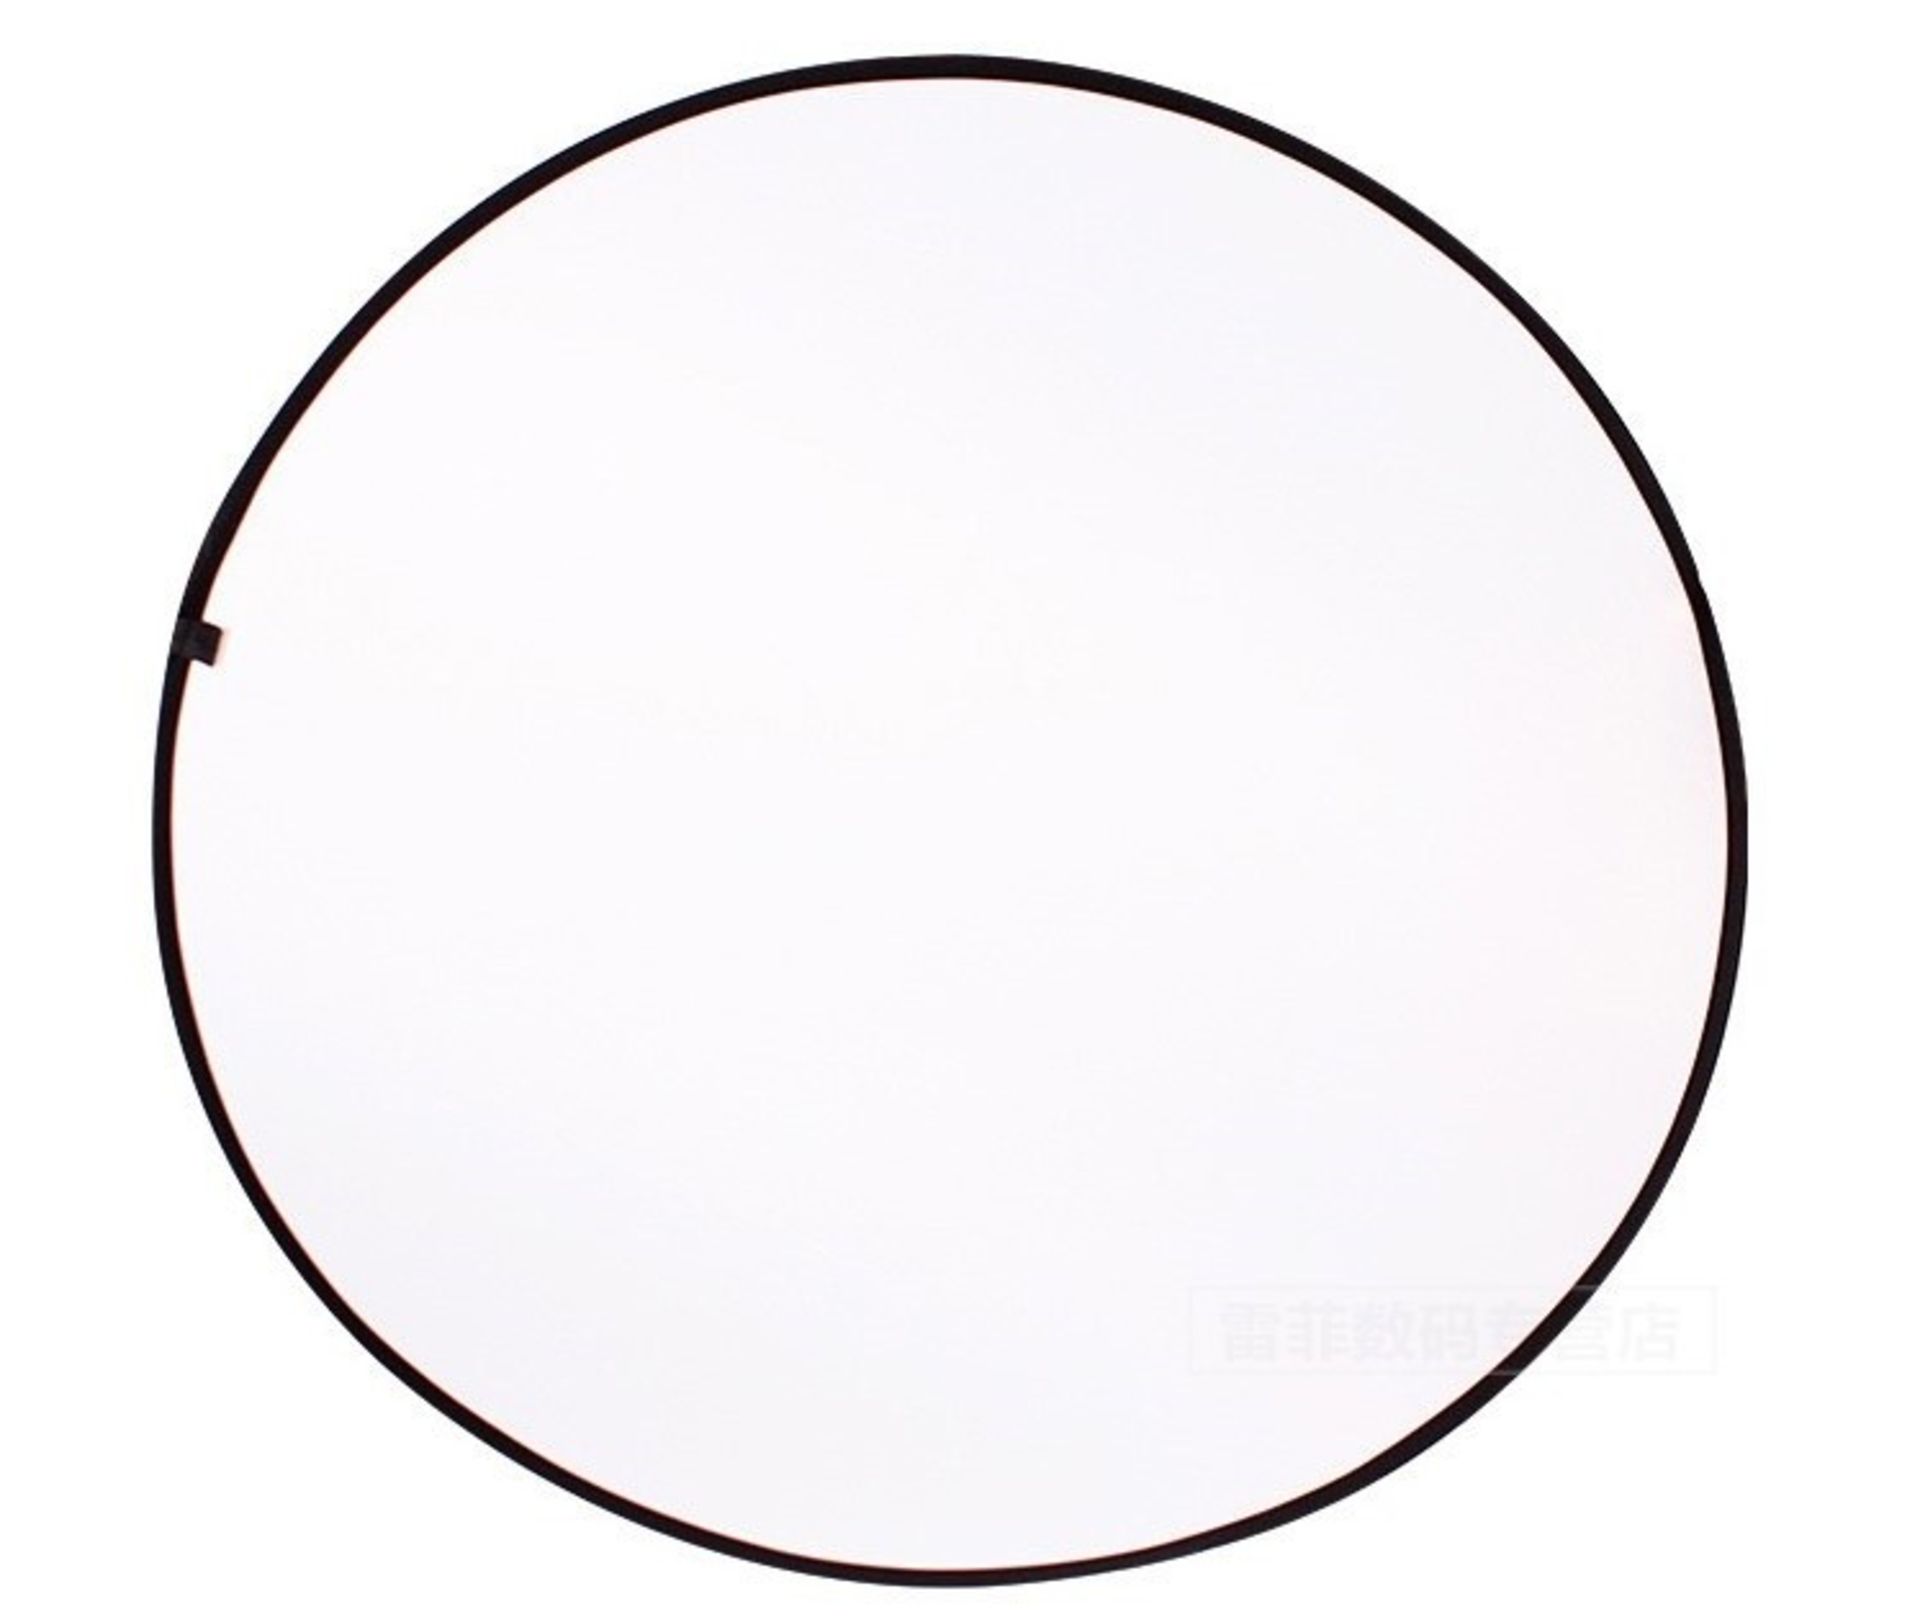 1 LOT TO CONTAIN 2 WHITE CIRCULAR SCREEN FOR PROJE